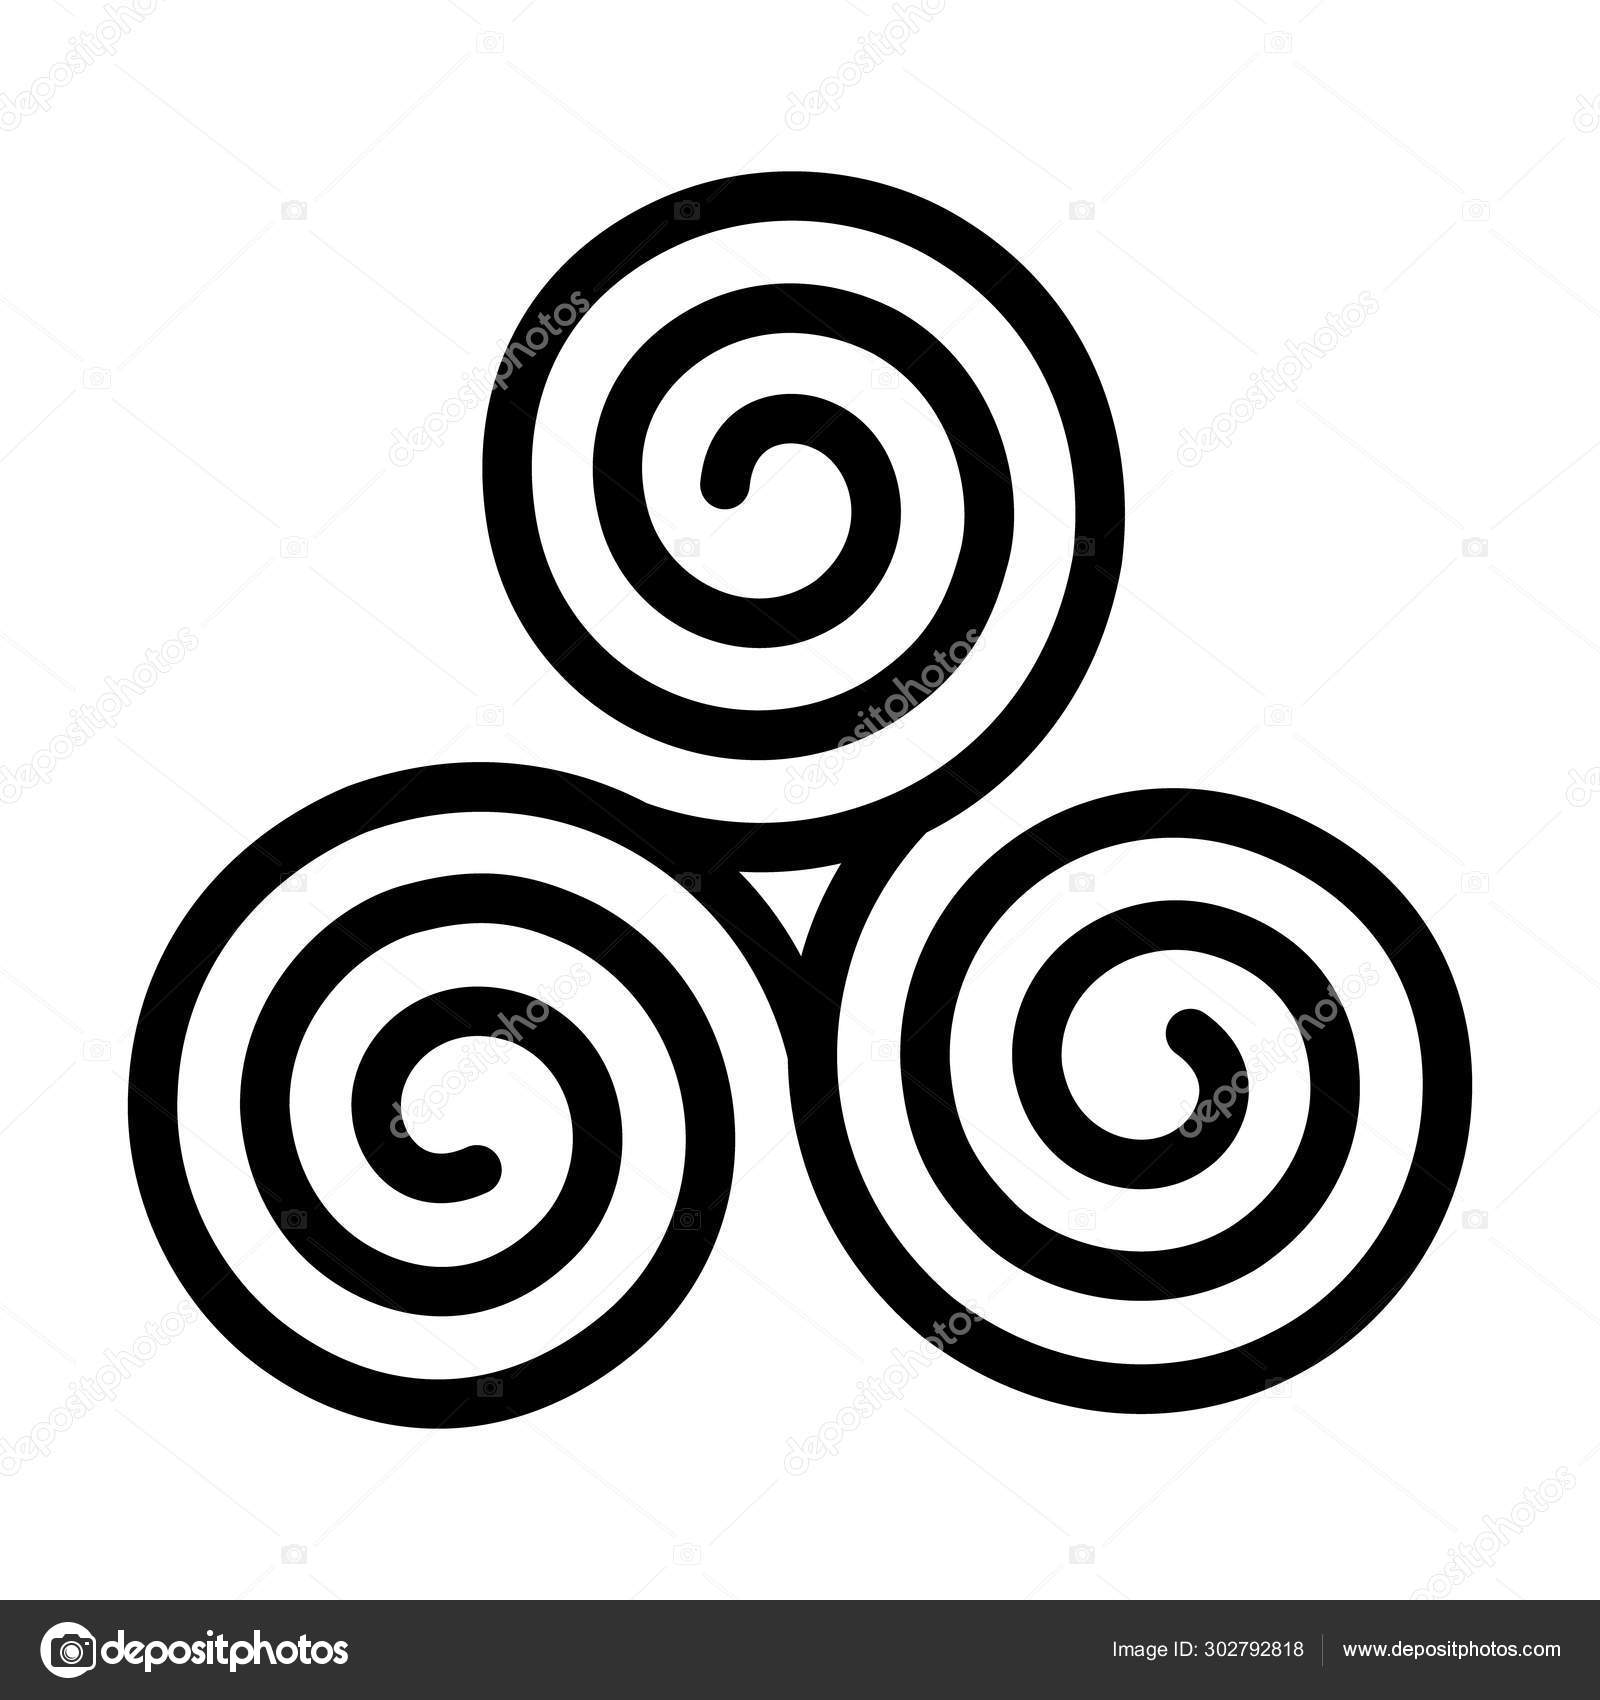 1 757 Celtic Spiral Vector Images Free Royalty Free Celtic Spiral Vectors Depositphotos